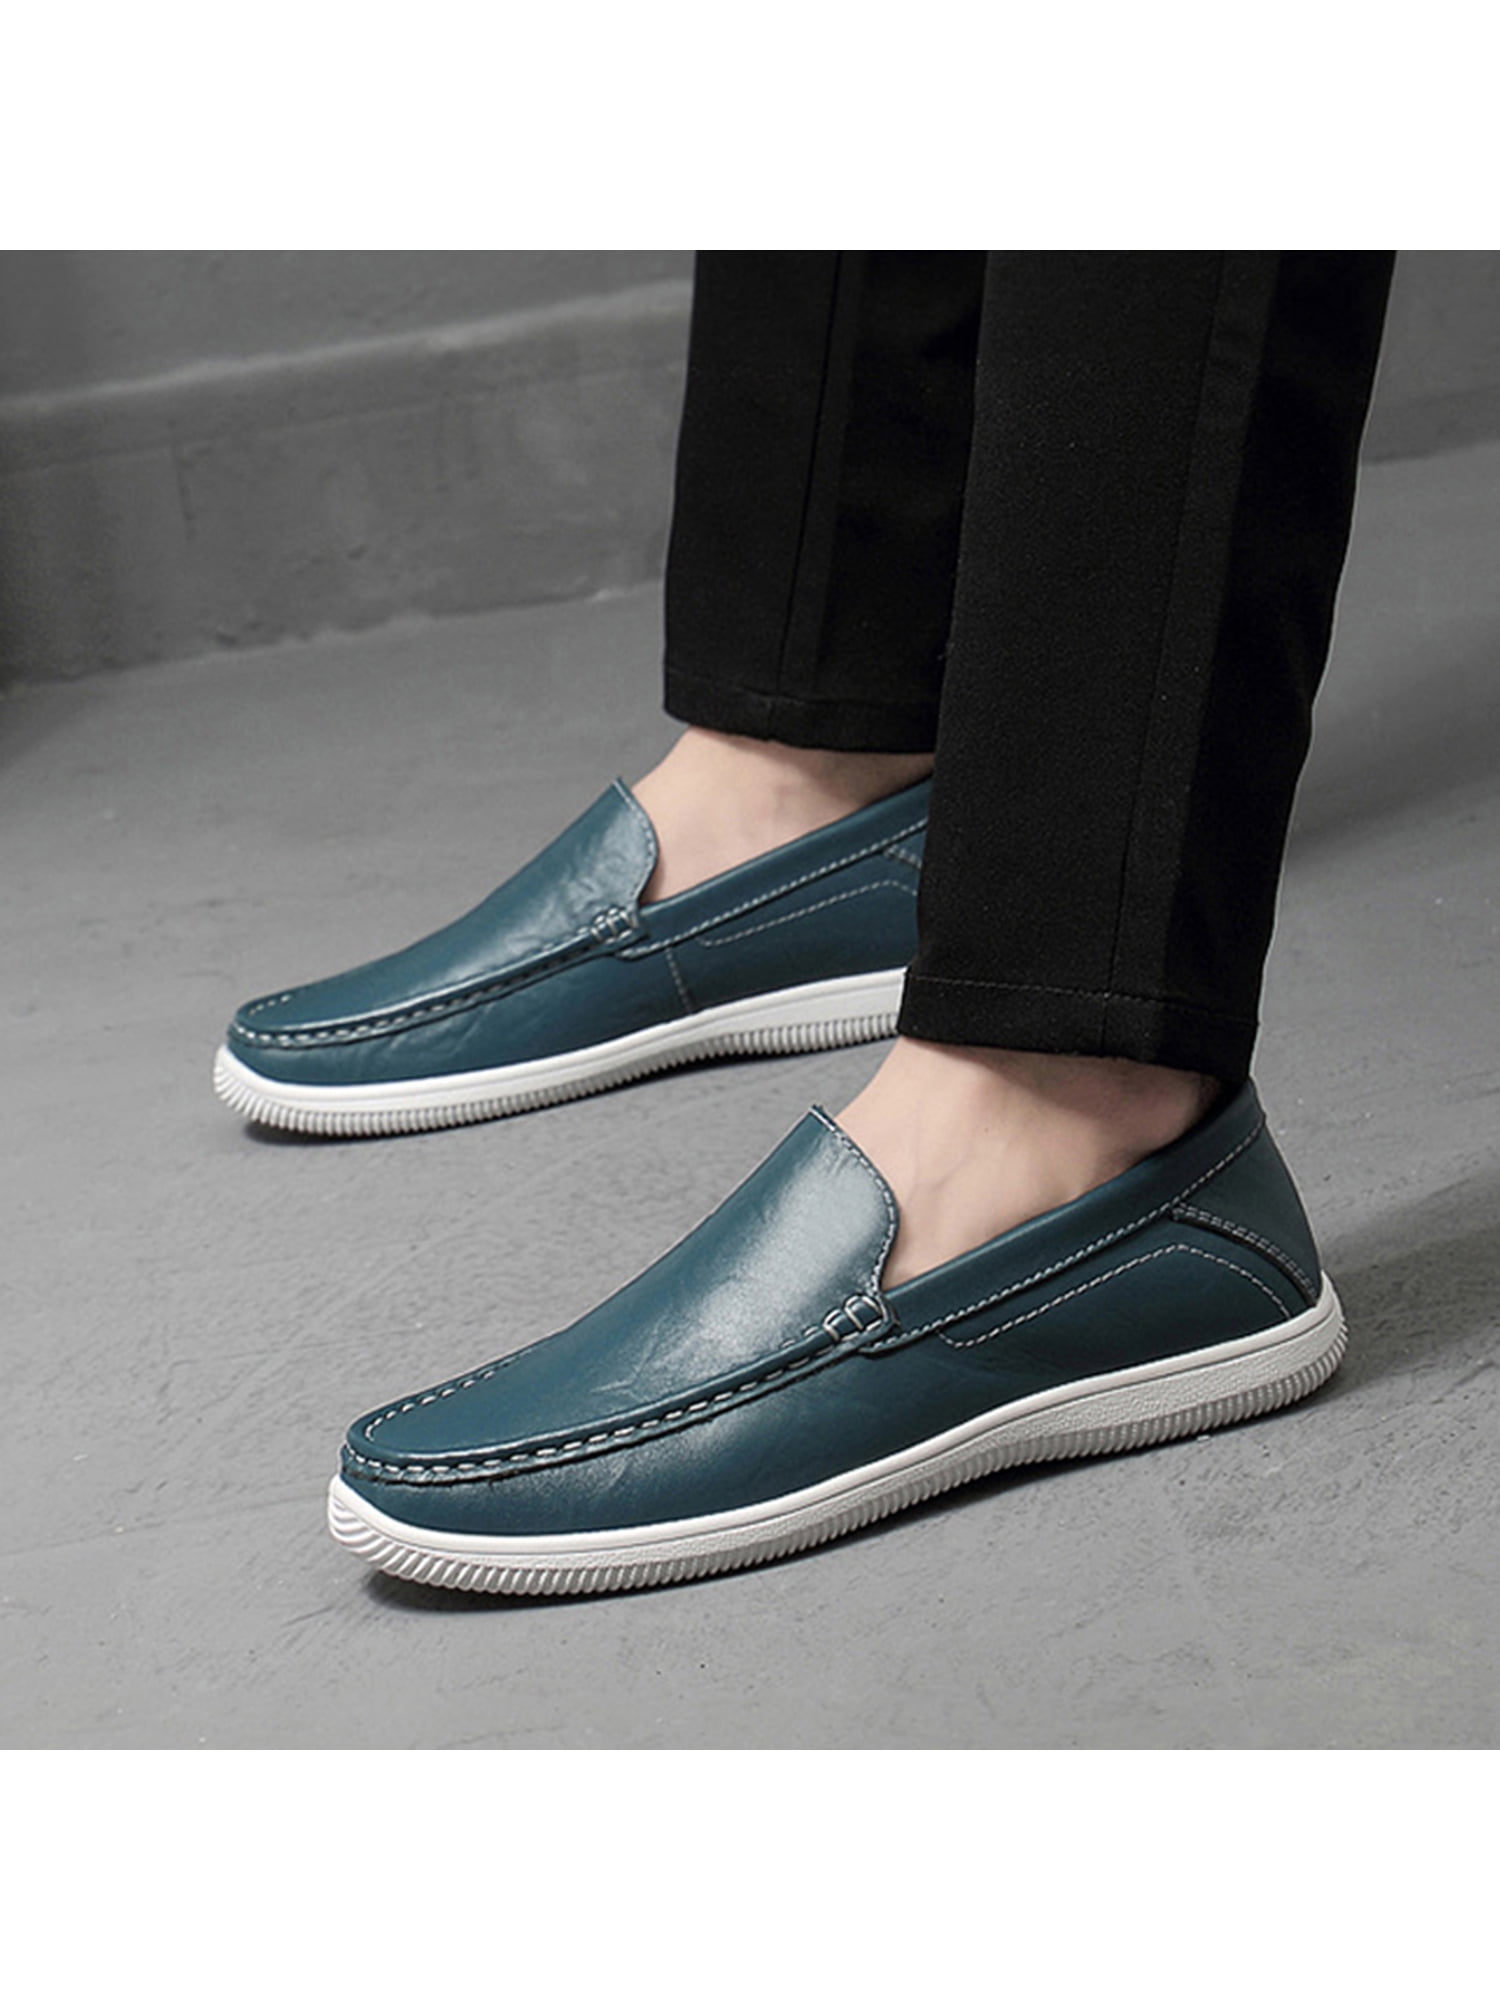 Mens Shoes Leisure Driving Loafers for Men Round Toe Oxfords Casual Flat Penny Shoes Leather Upper Slip On Stitch Walking Boat Shoes Lightweight Fashion